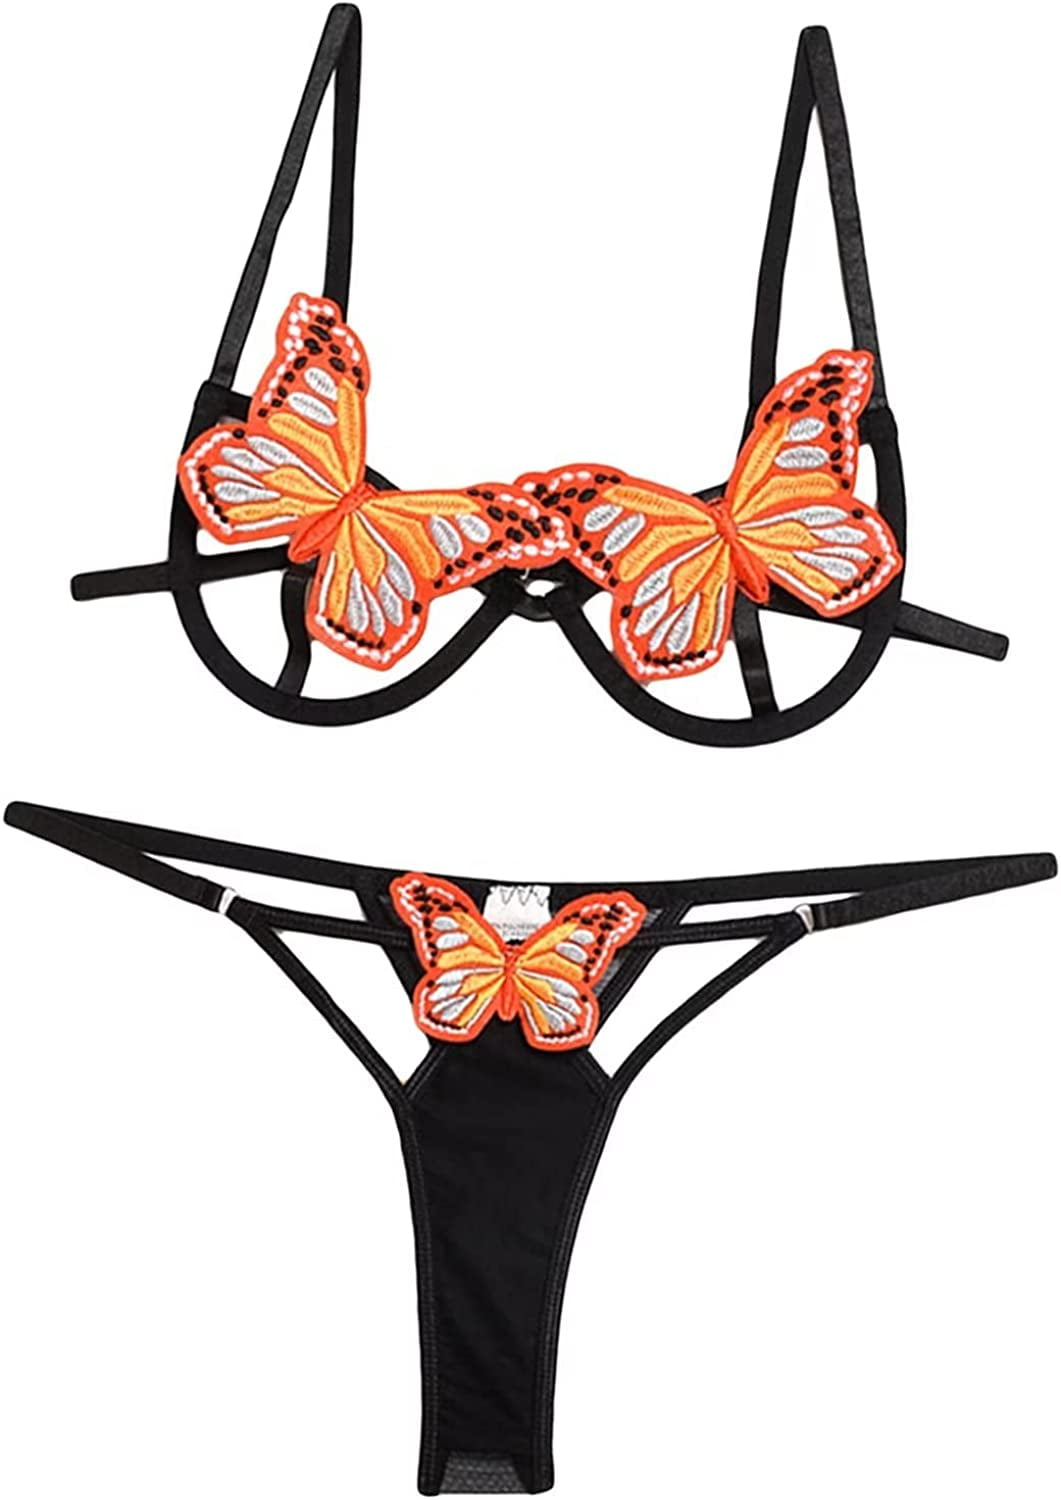 Falainetee Womens Sexy Butterfly Print Lingerie 2 Piece Cut Out Lingerie Sets